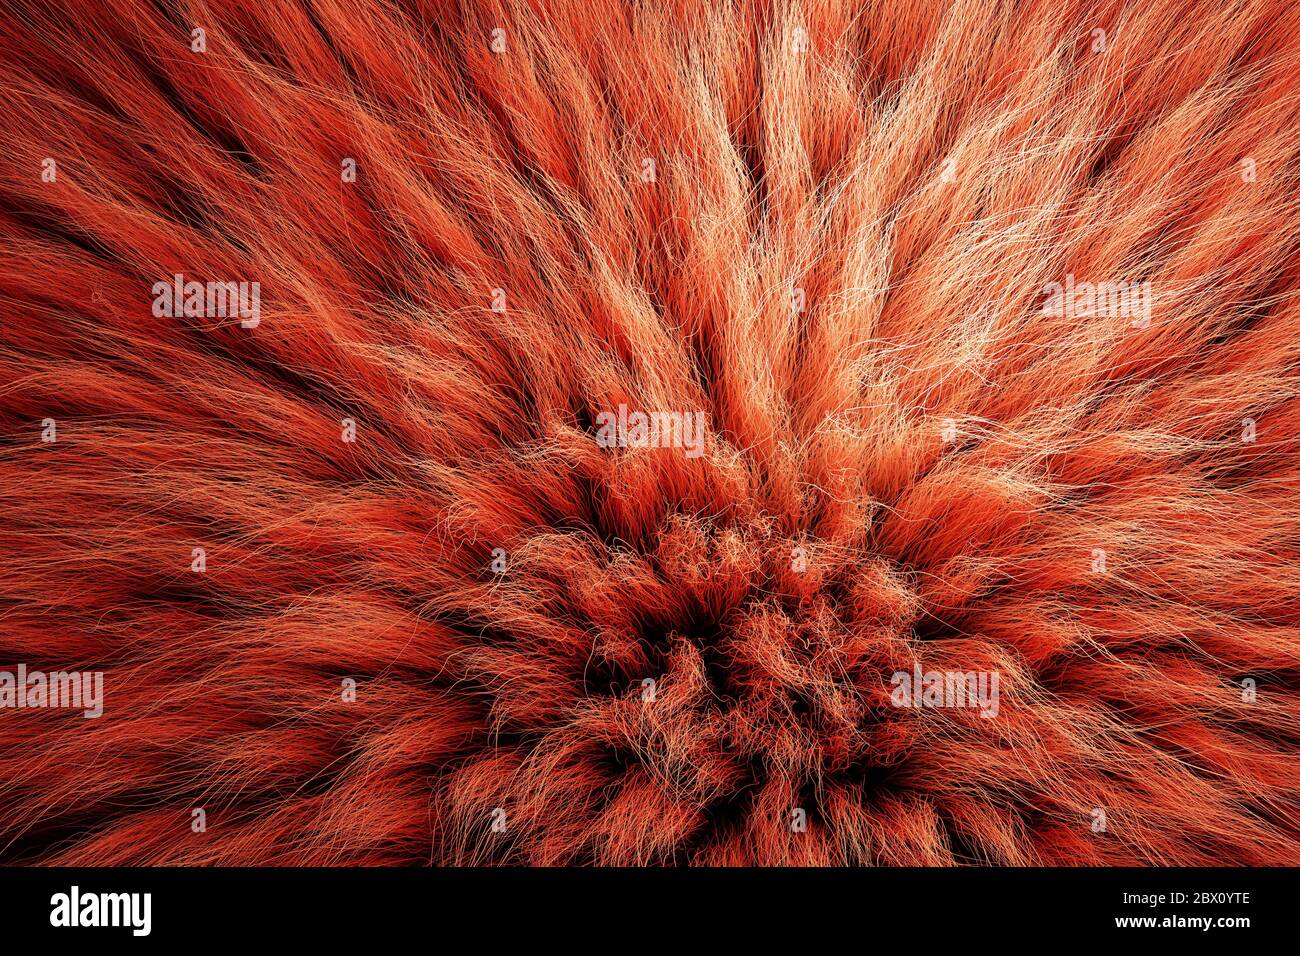 3D render of shaggy carpet with wool material for backgrounds texture, close up of soft attractive orange brown and fluffy Stock Photo